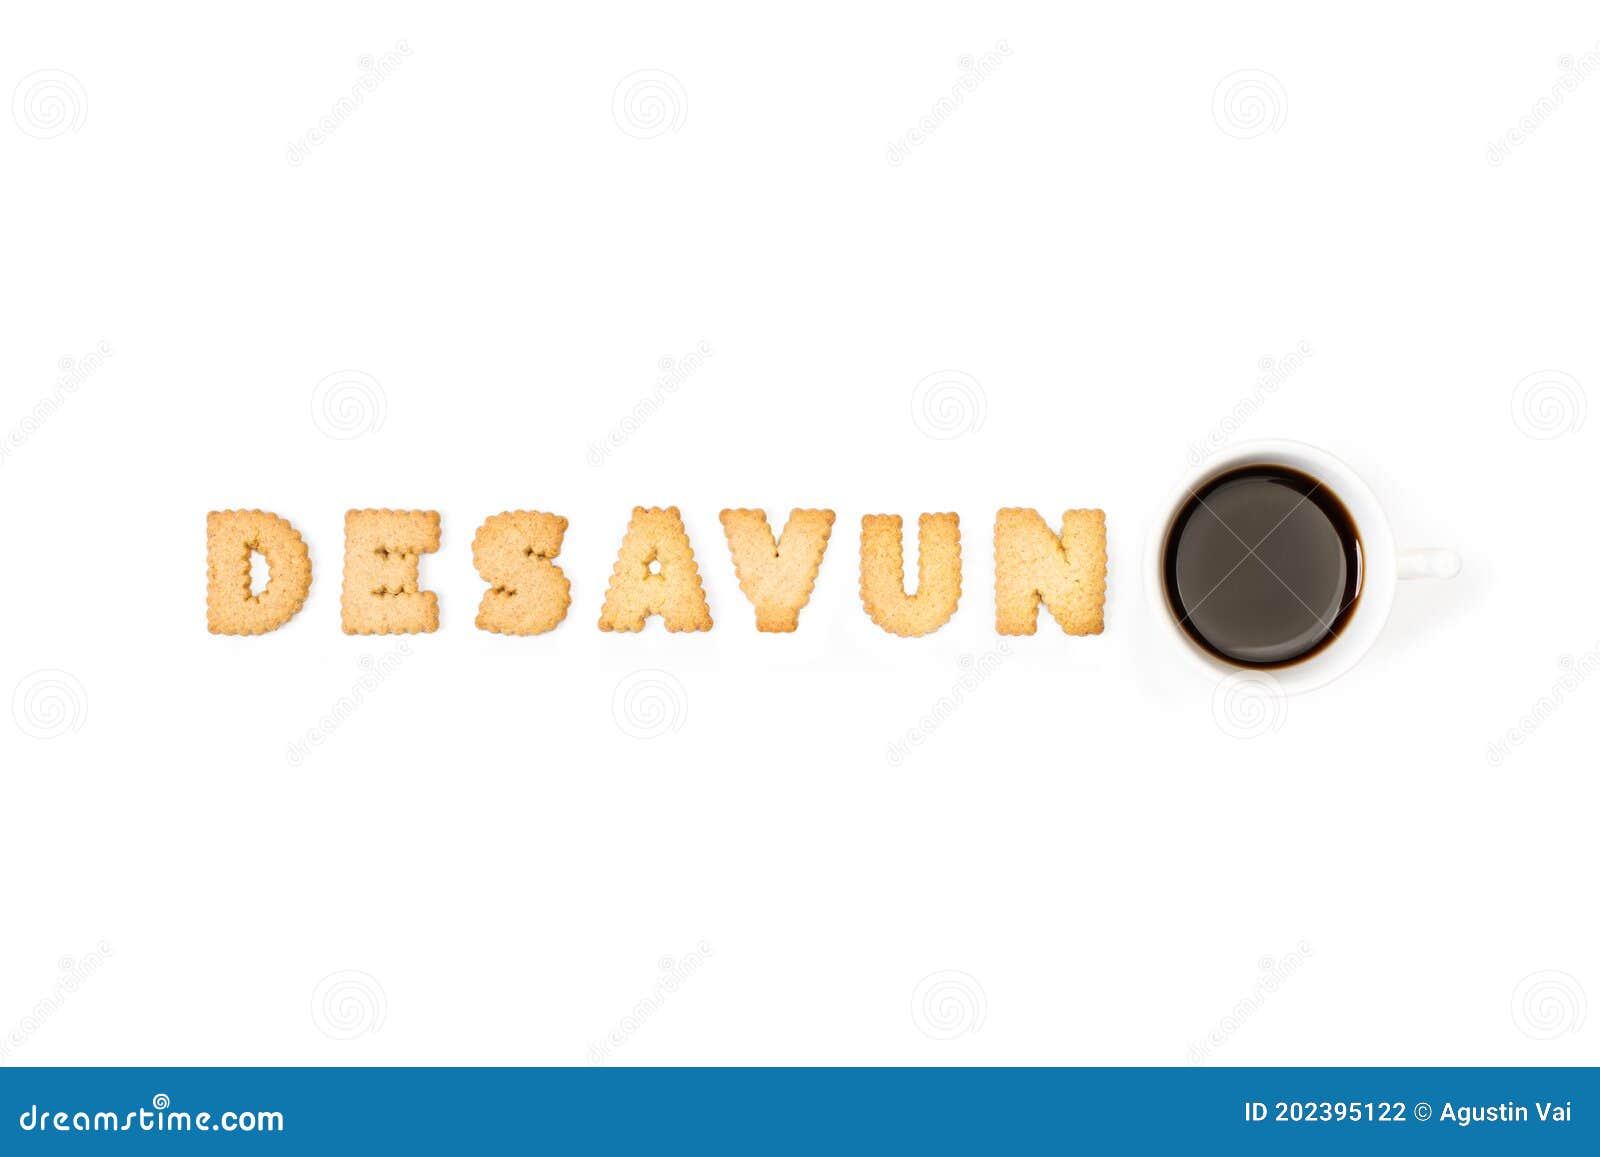 desayuno with alphabet letters cookies and a cup of coffee on a white background